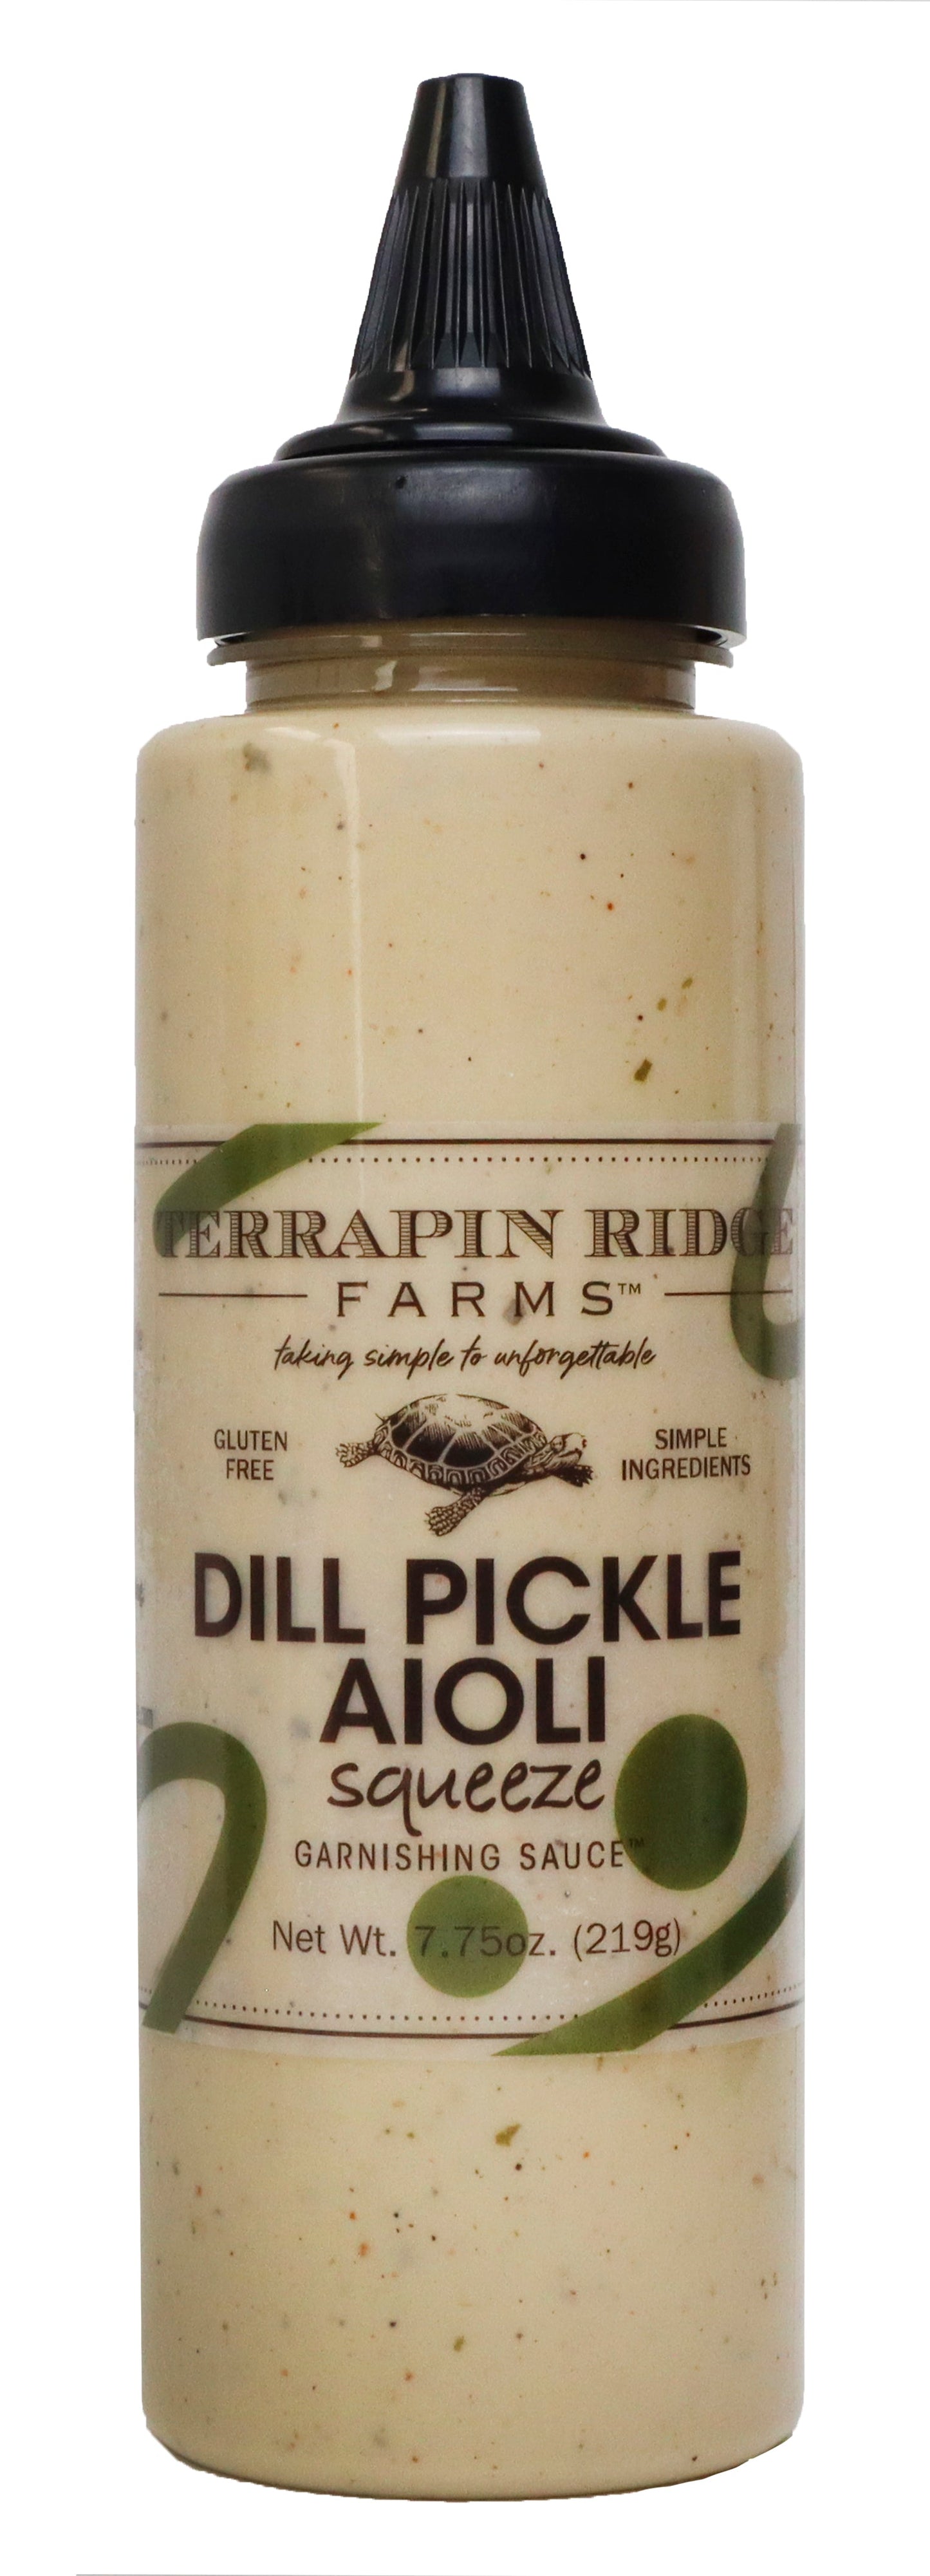 Dill Pickle Aioli Squeeze bottle.